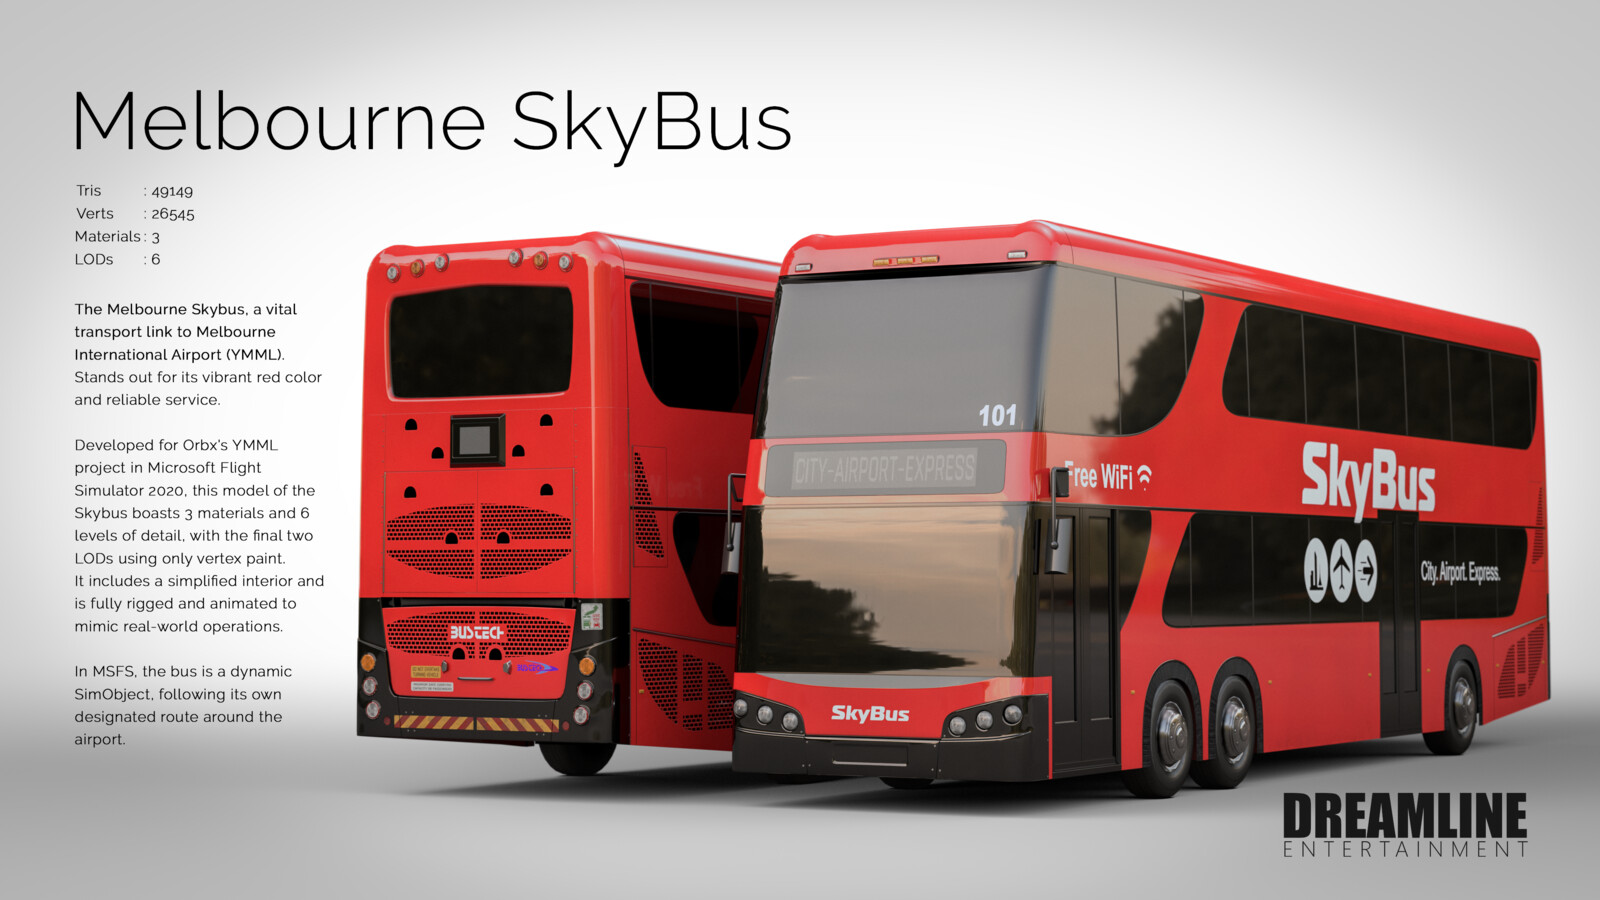 Melbourne SkyBus